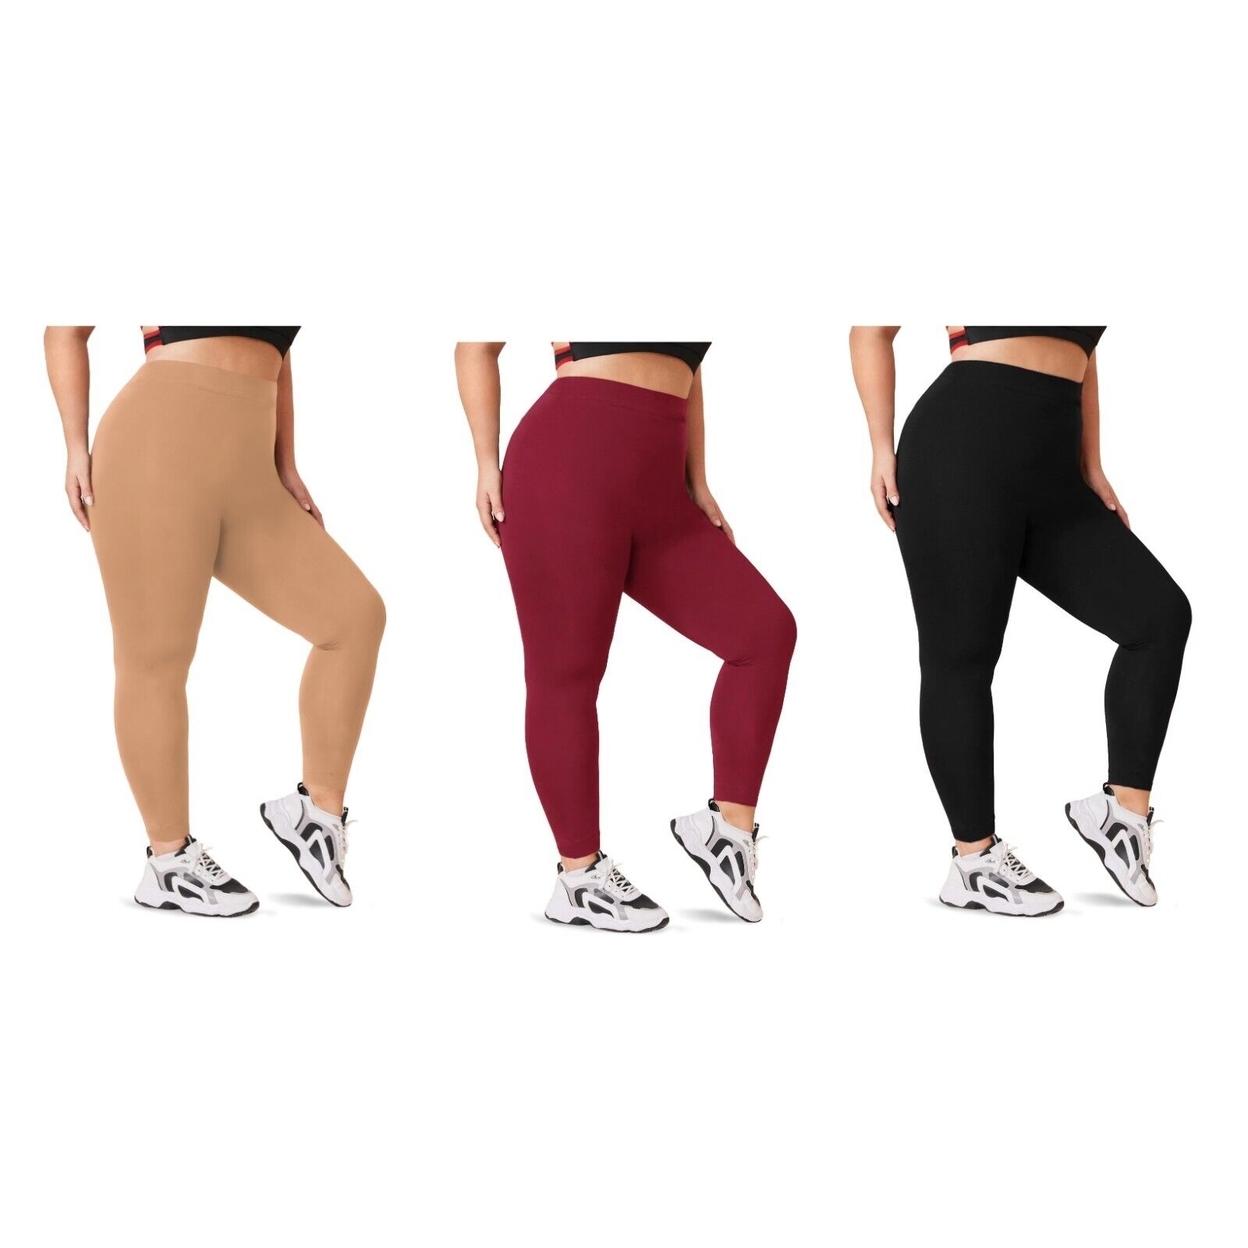 2-Pack: Women's Casual Ultra-Soft Smooth High Waisted Athletic Active Yoga Leggings Plus Size Available - Beige & Beige, 4x